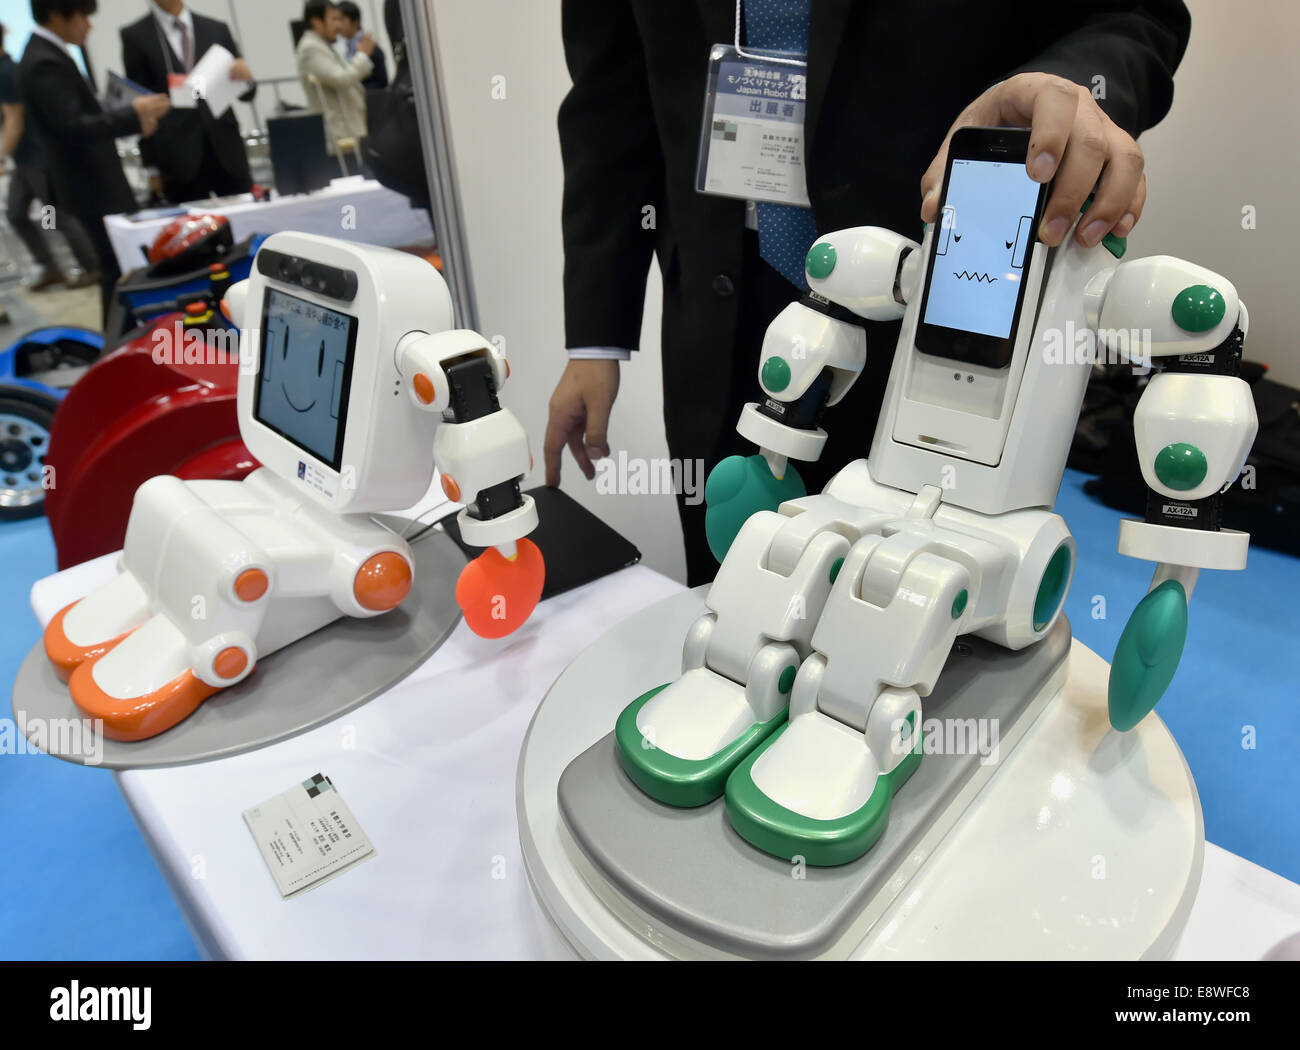 Tokyo, Japan. 15th Oct, 2014. Entertainment robots are shown at Japan Robot  Seek 2014, an exhibition of service robots and related technologies, at  Tokyo Big Sight on Thursday, October 15, 2014. The